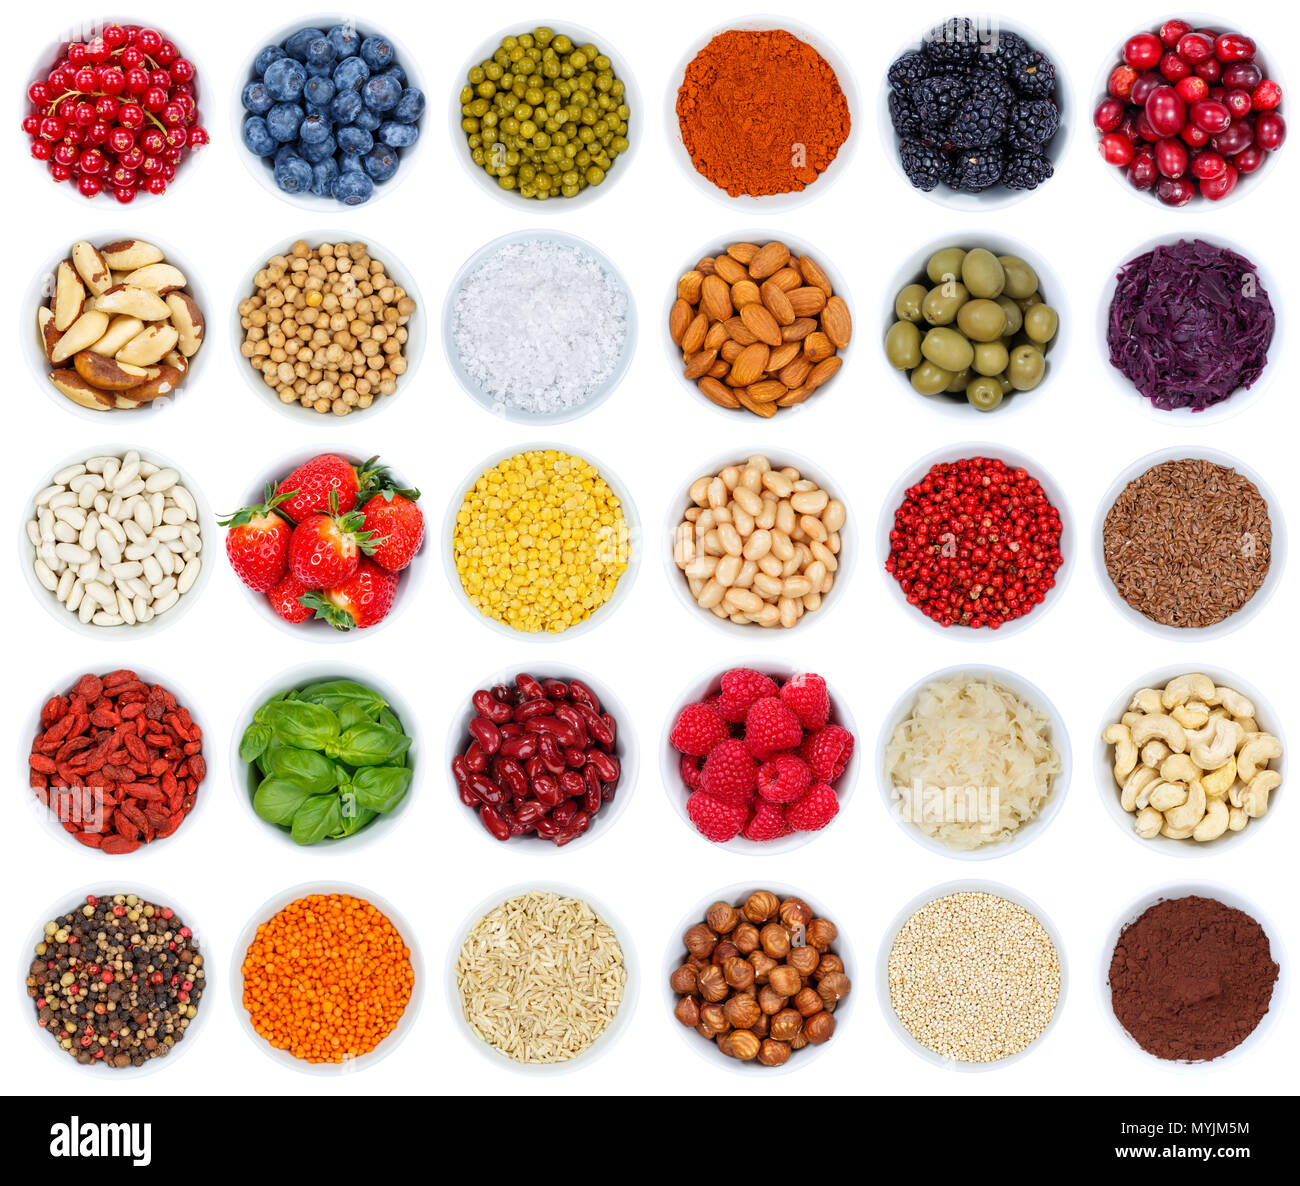 Collection of fruits and vegetables berries from above bowl isolated on a white background Stock Photo